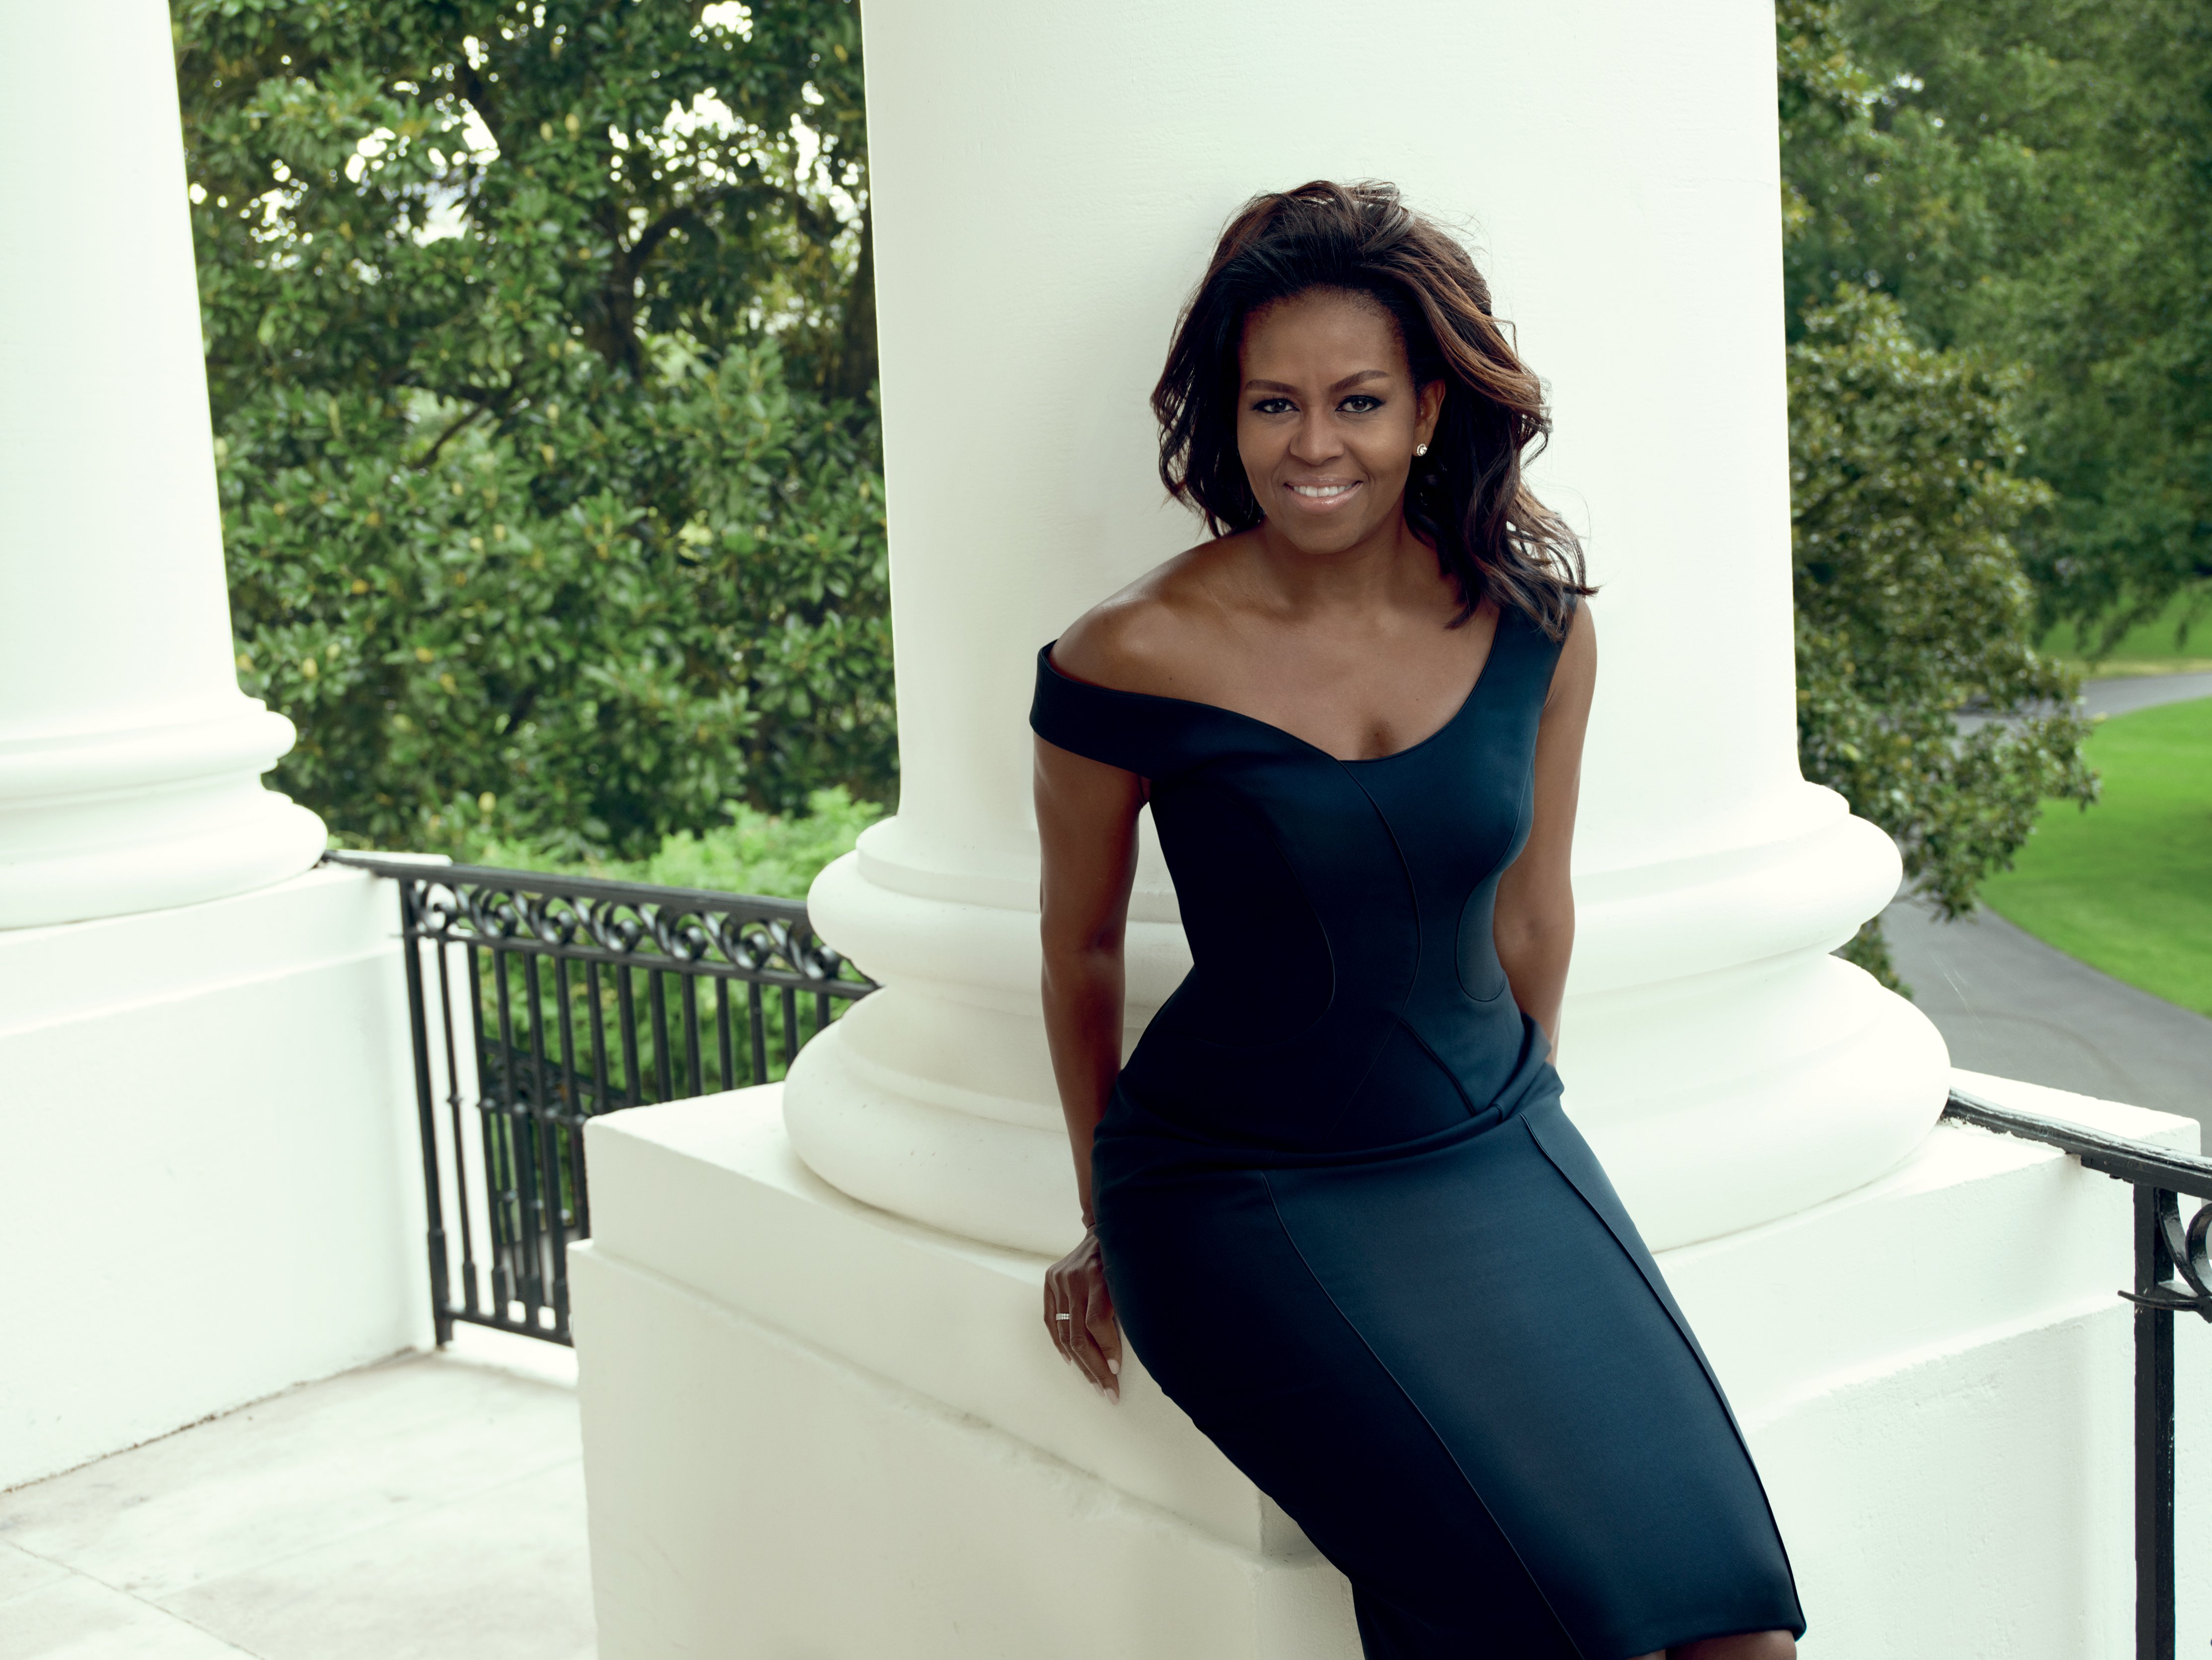 Michelle Obama in the December 2016 issue of Vogue 